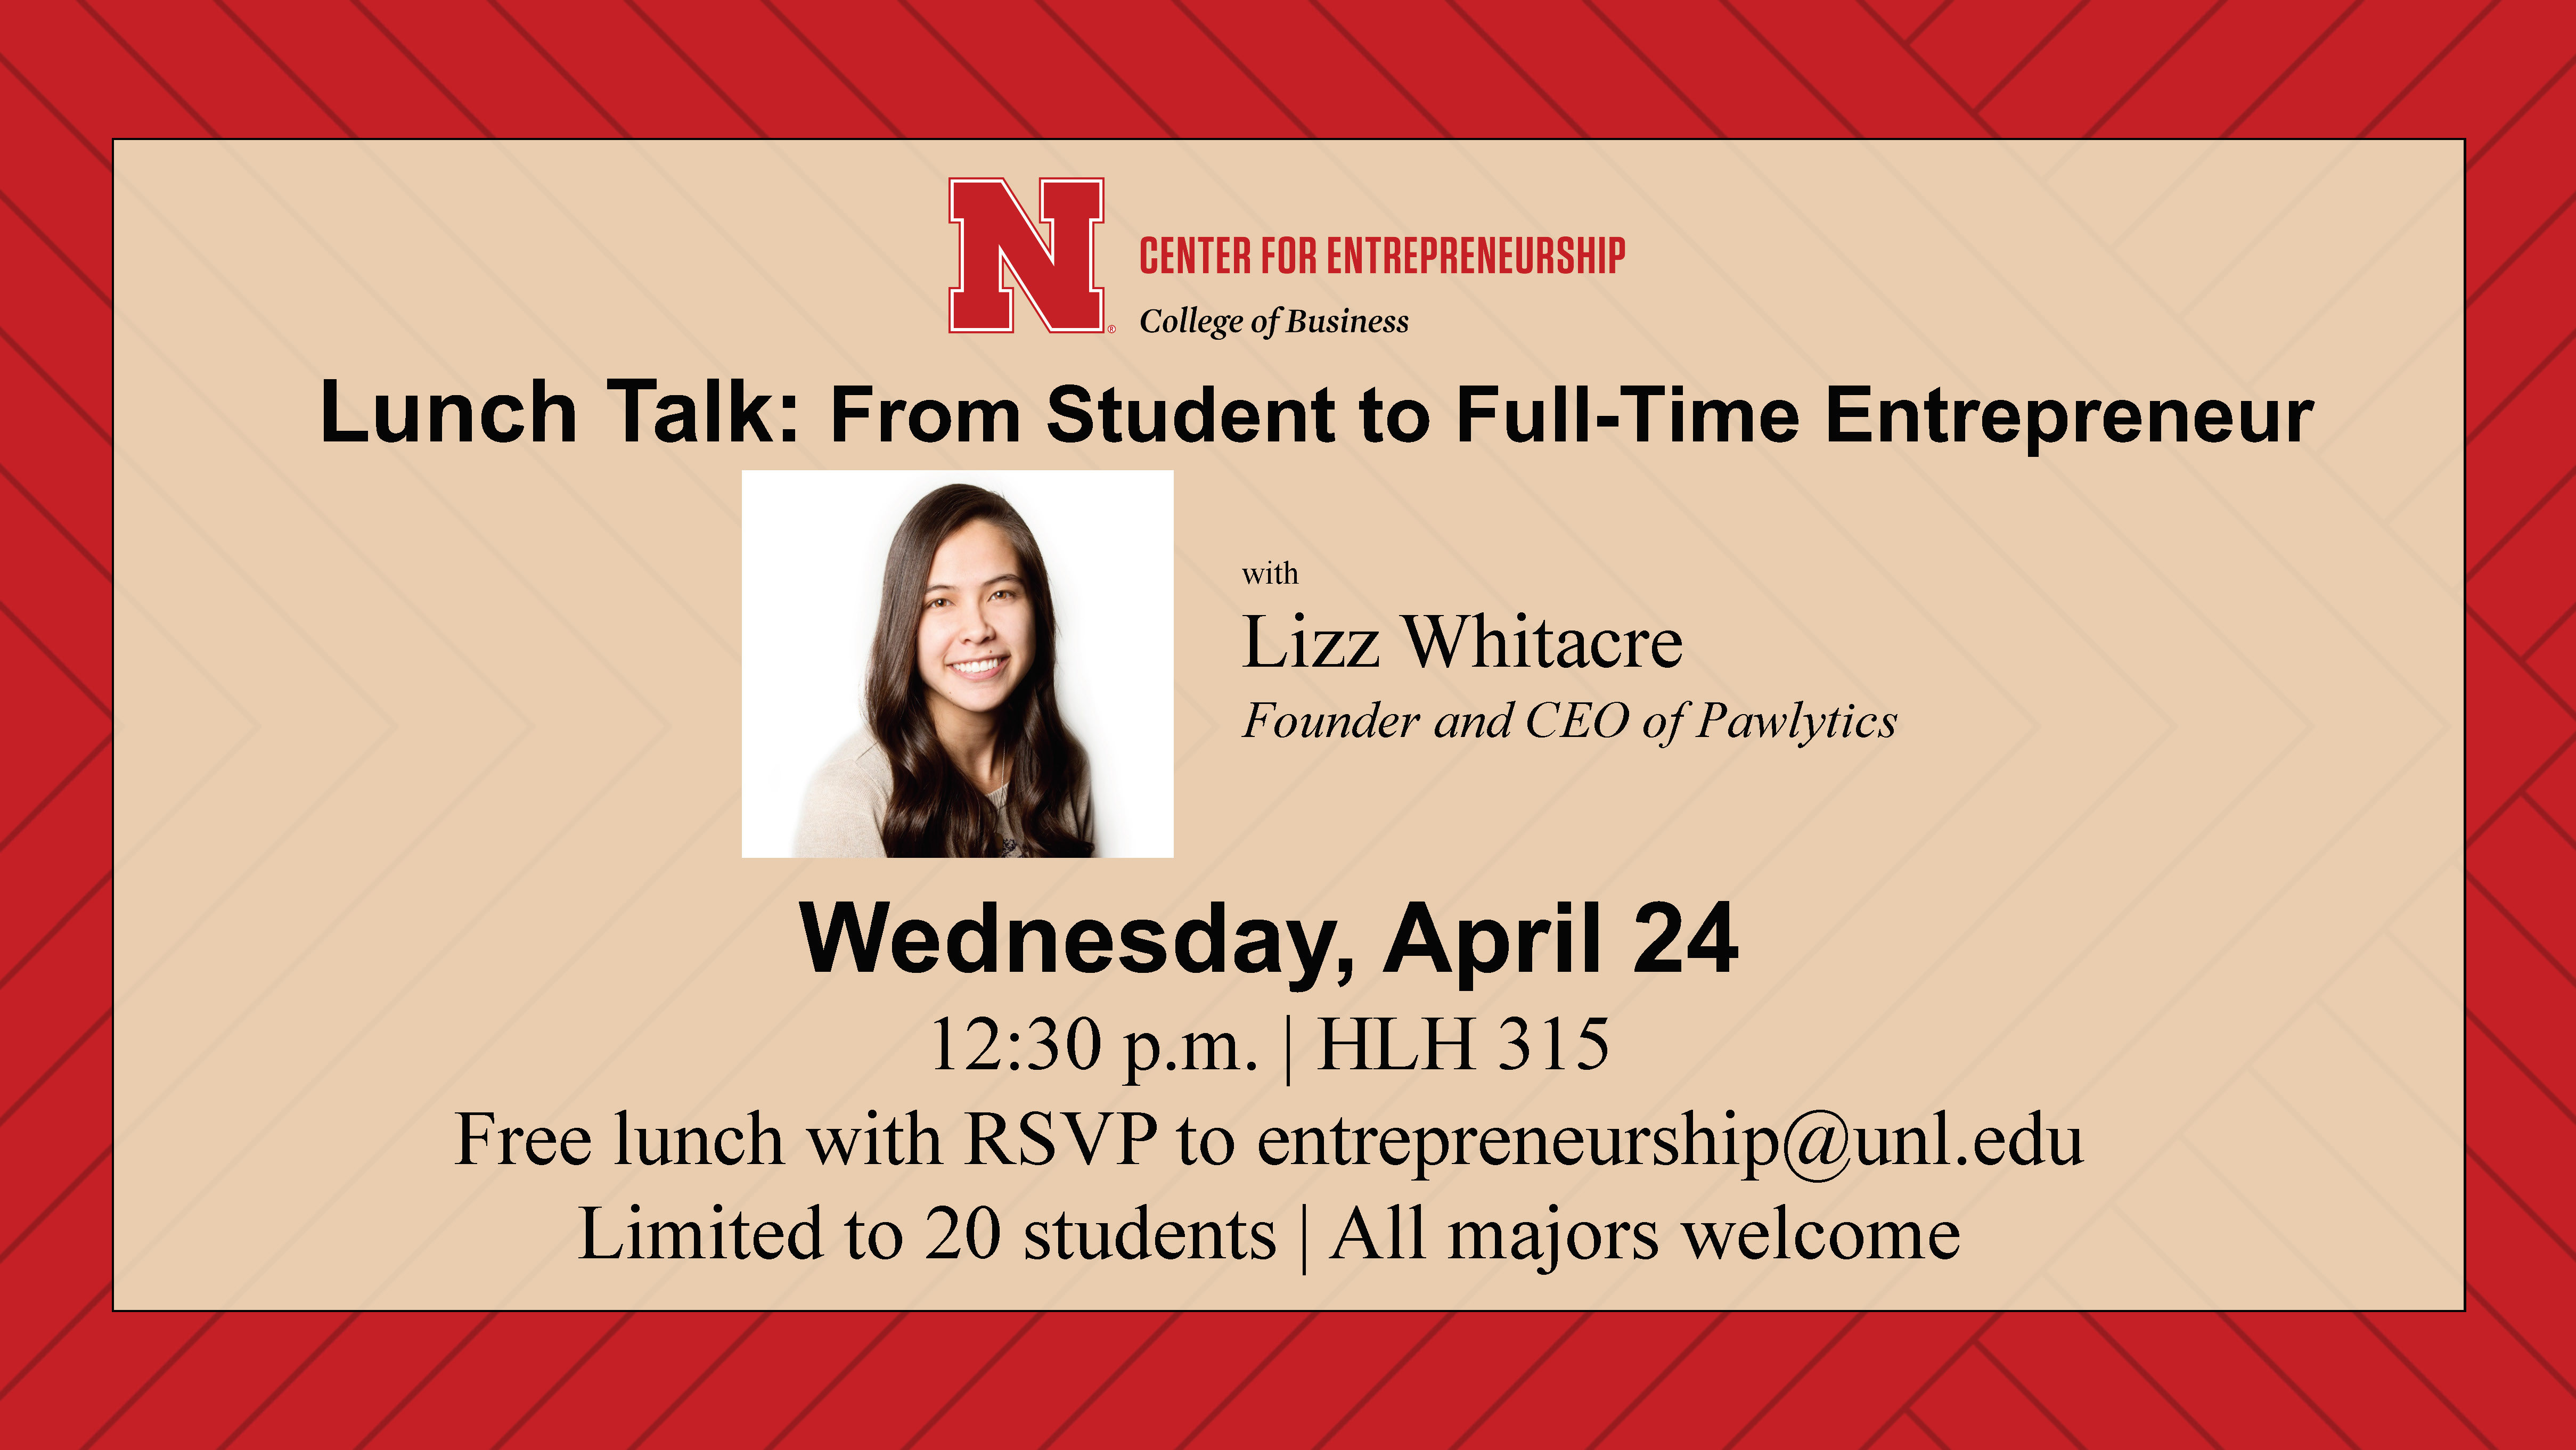 Learn what it's like going from student to full-time entrepreneur.